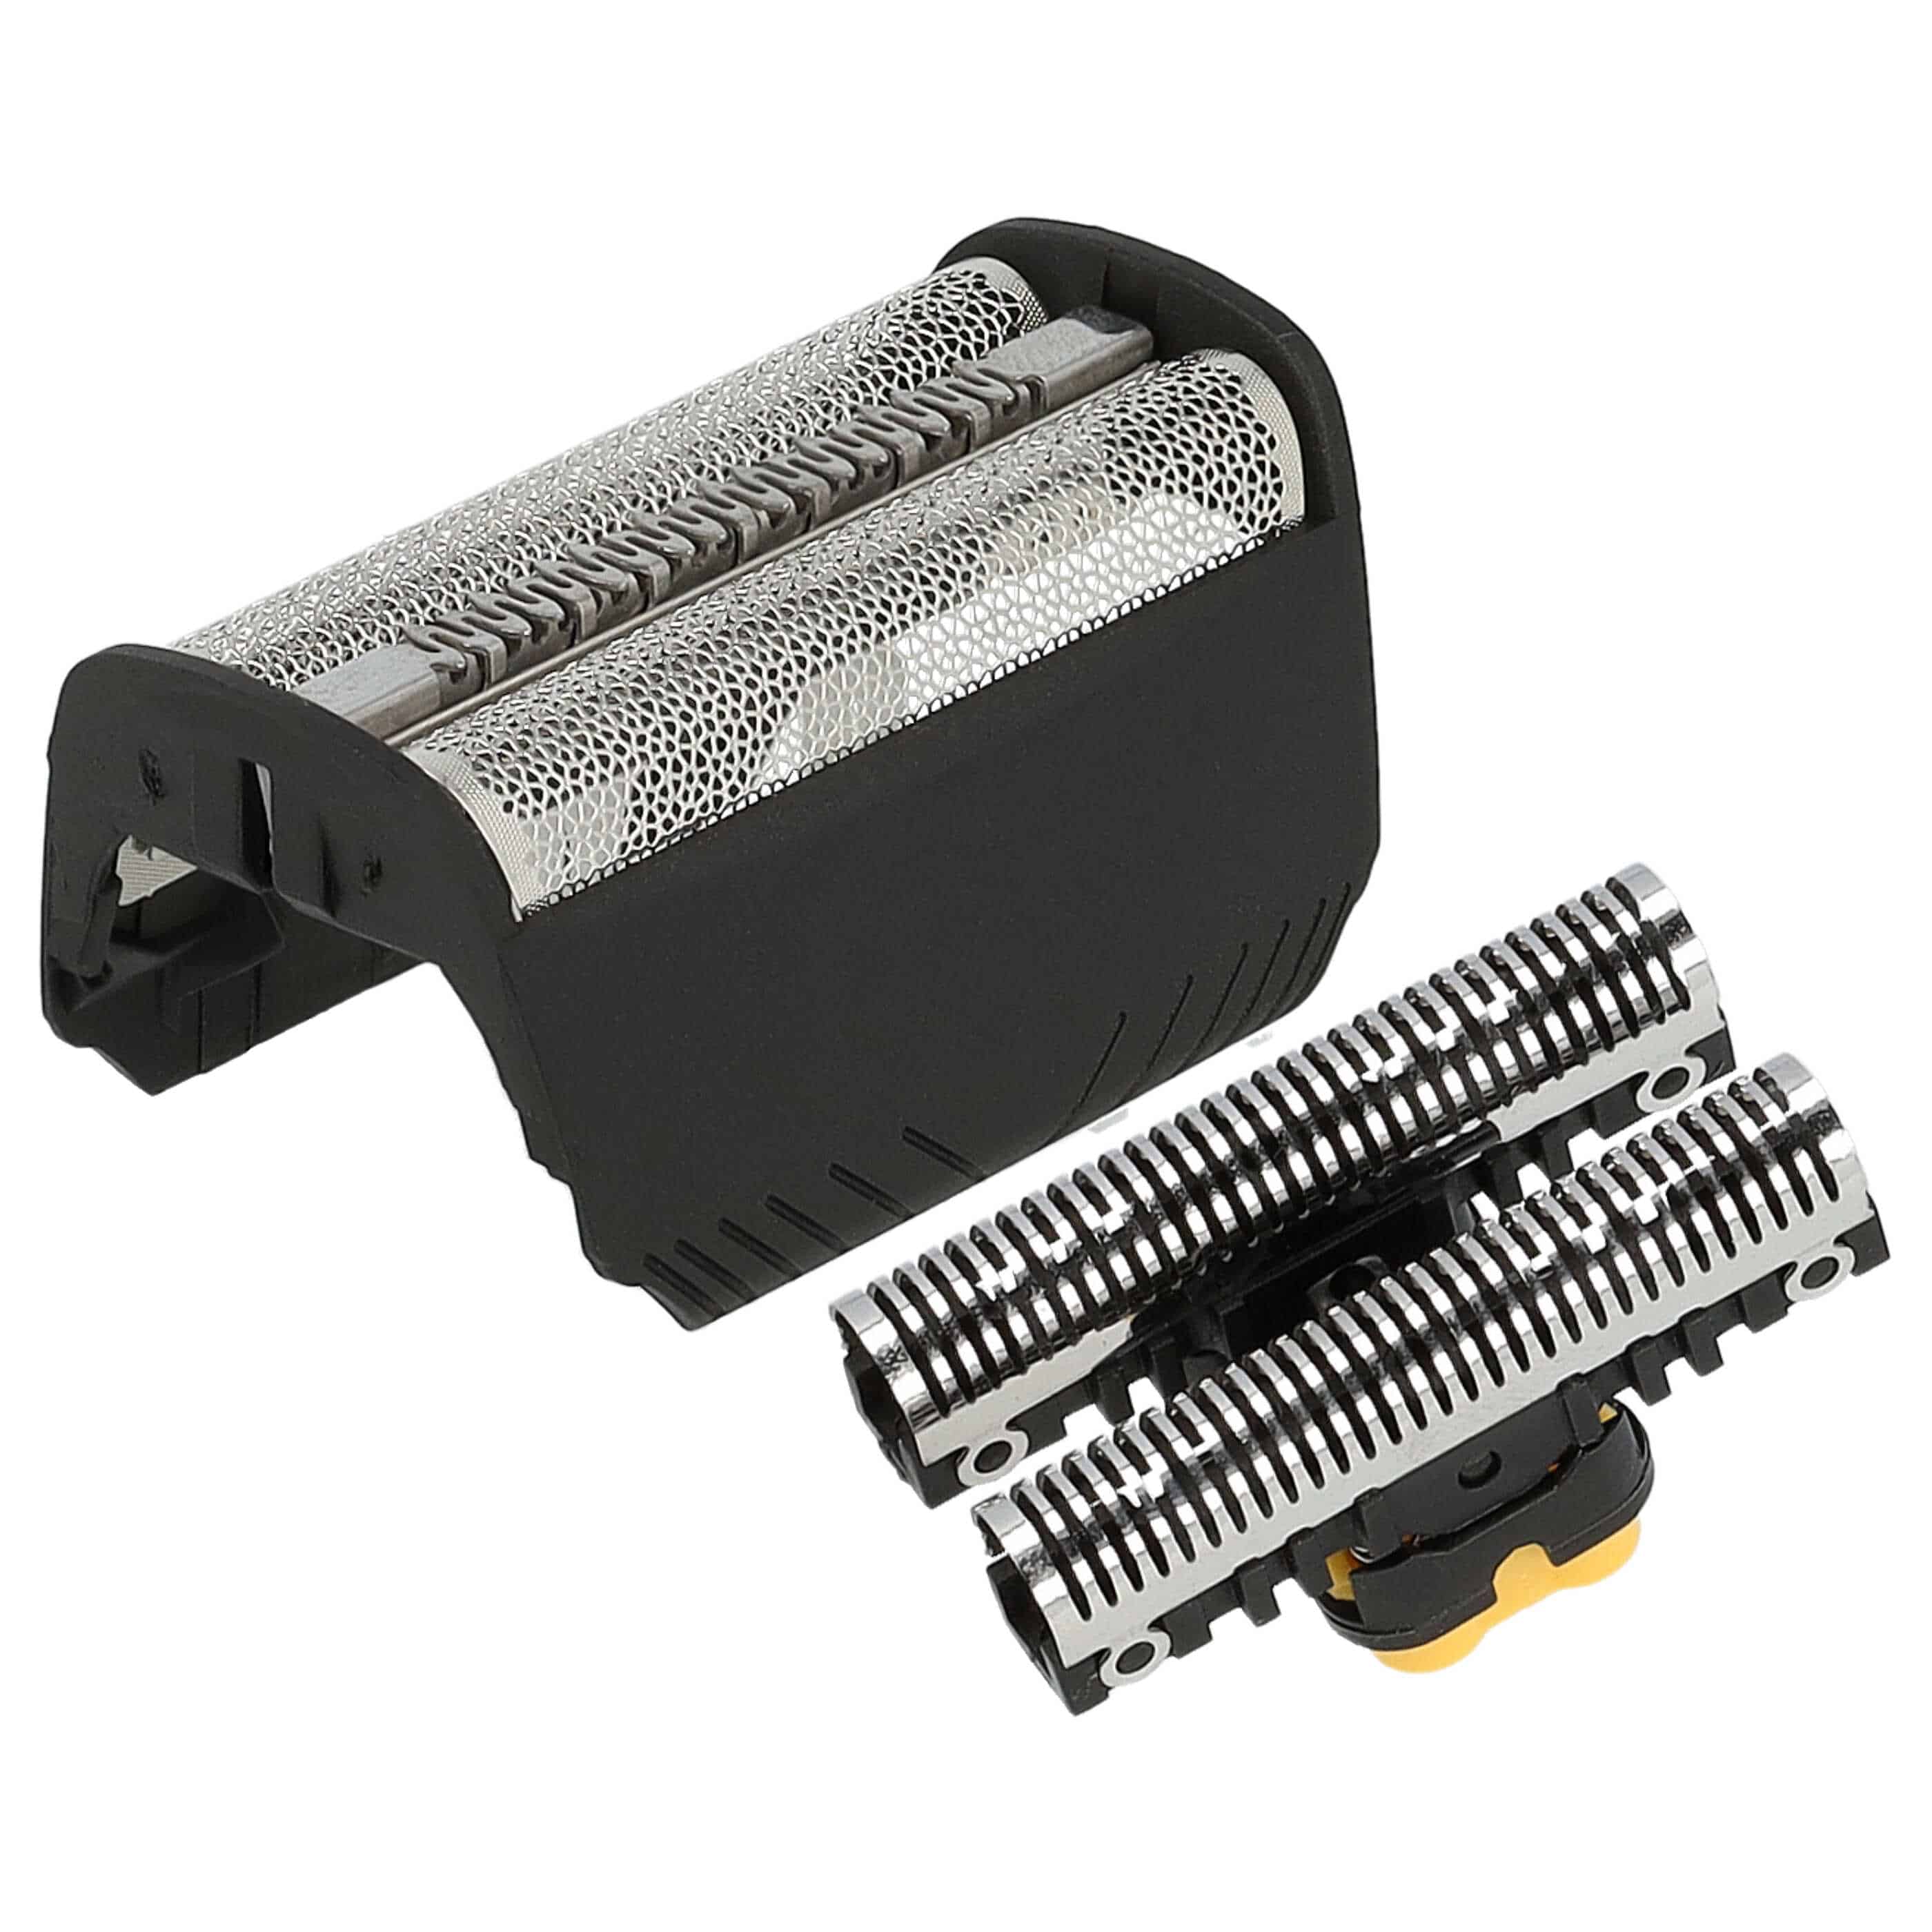 Combi Pack Shaver Part replaces Braun 30B Mul, 30B for for Razor - Foil + Blades, Black